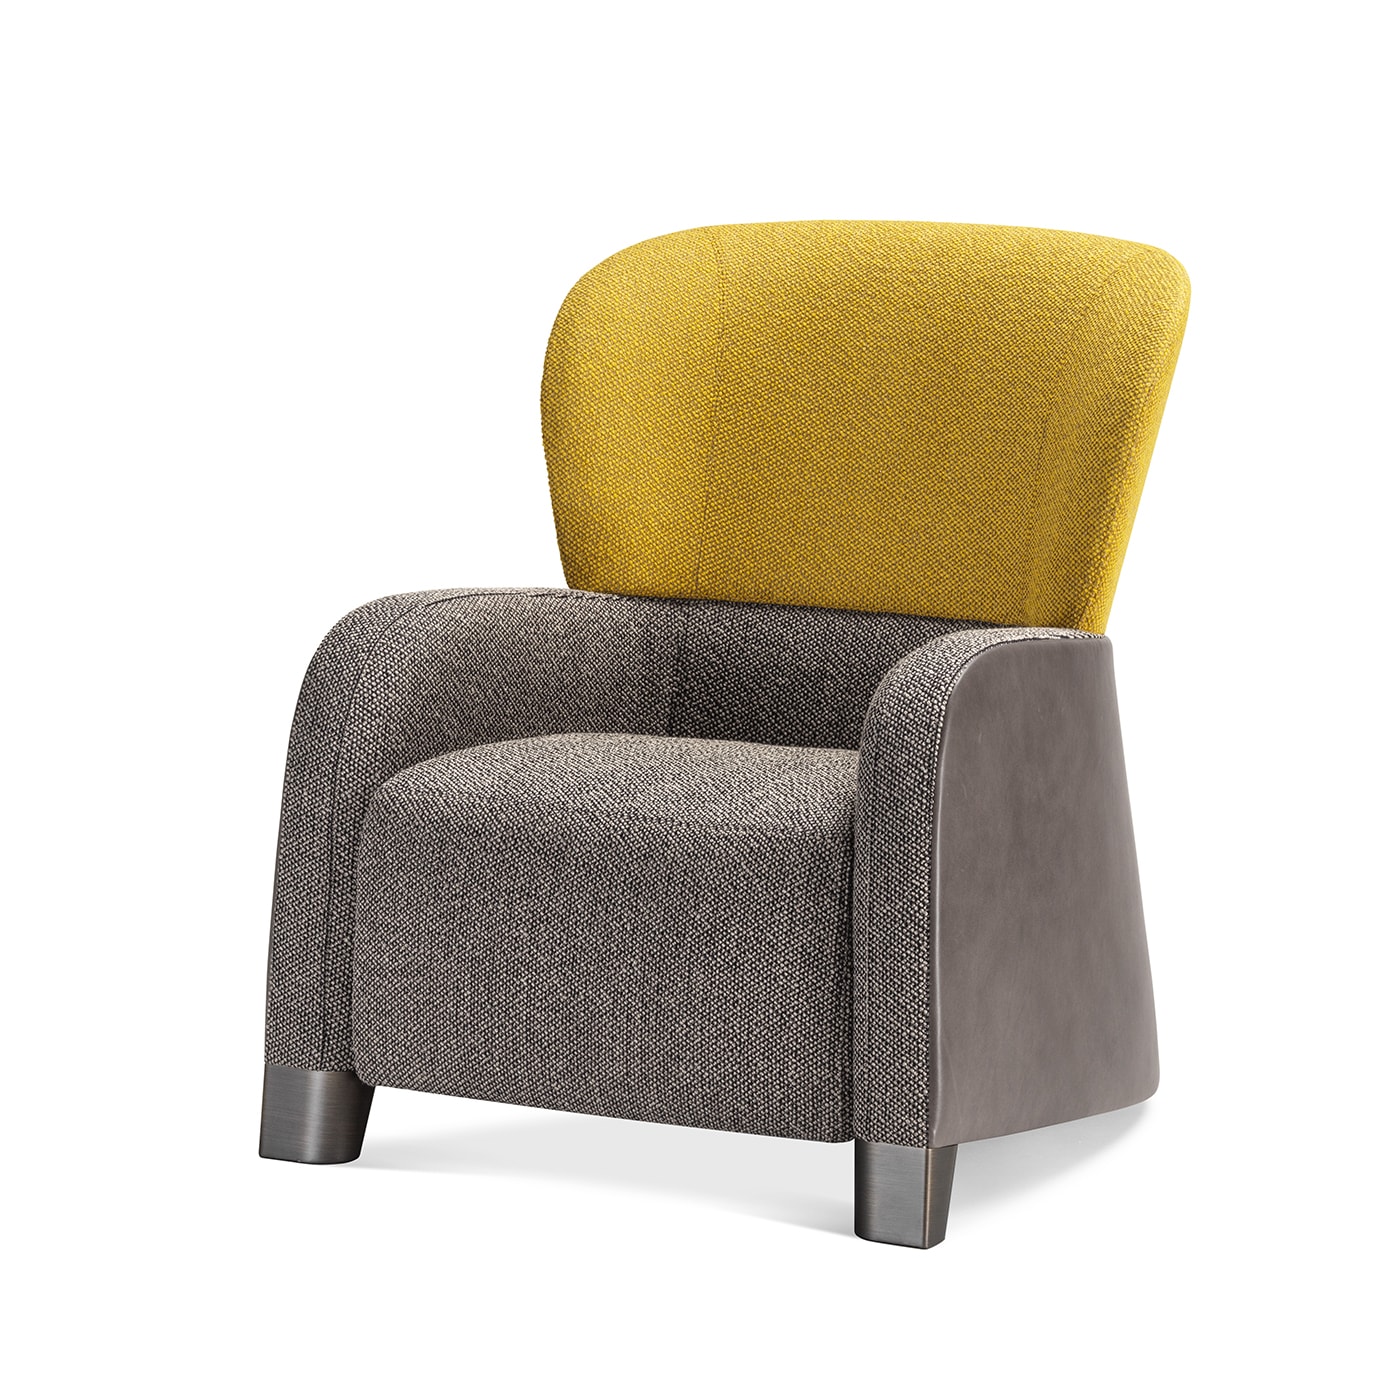 BUCKET YELLOW/GRAY ARMCHAIR WITH TALL HEADREST BY E. GIOVANNONI